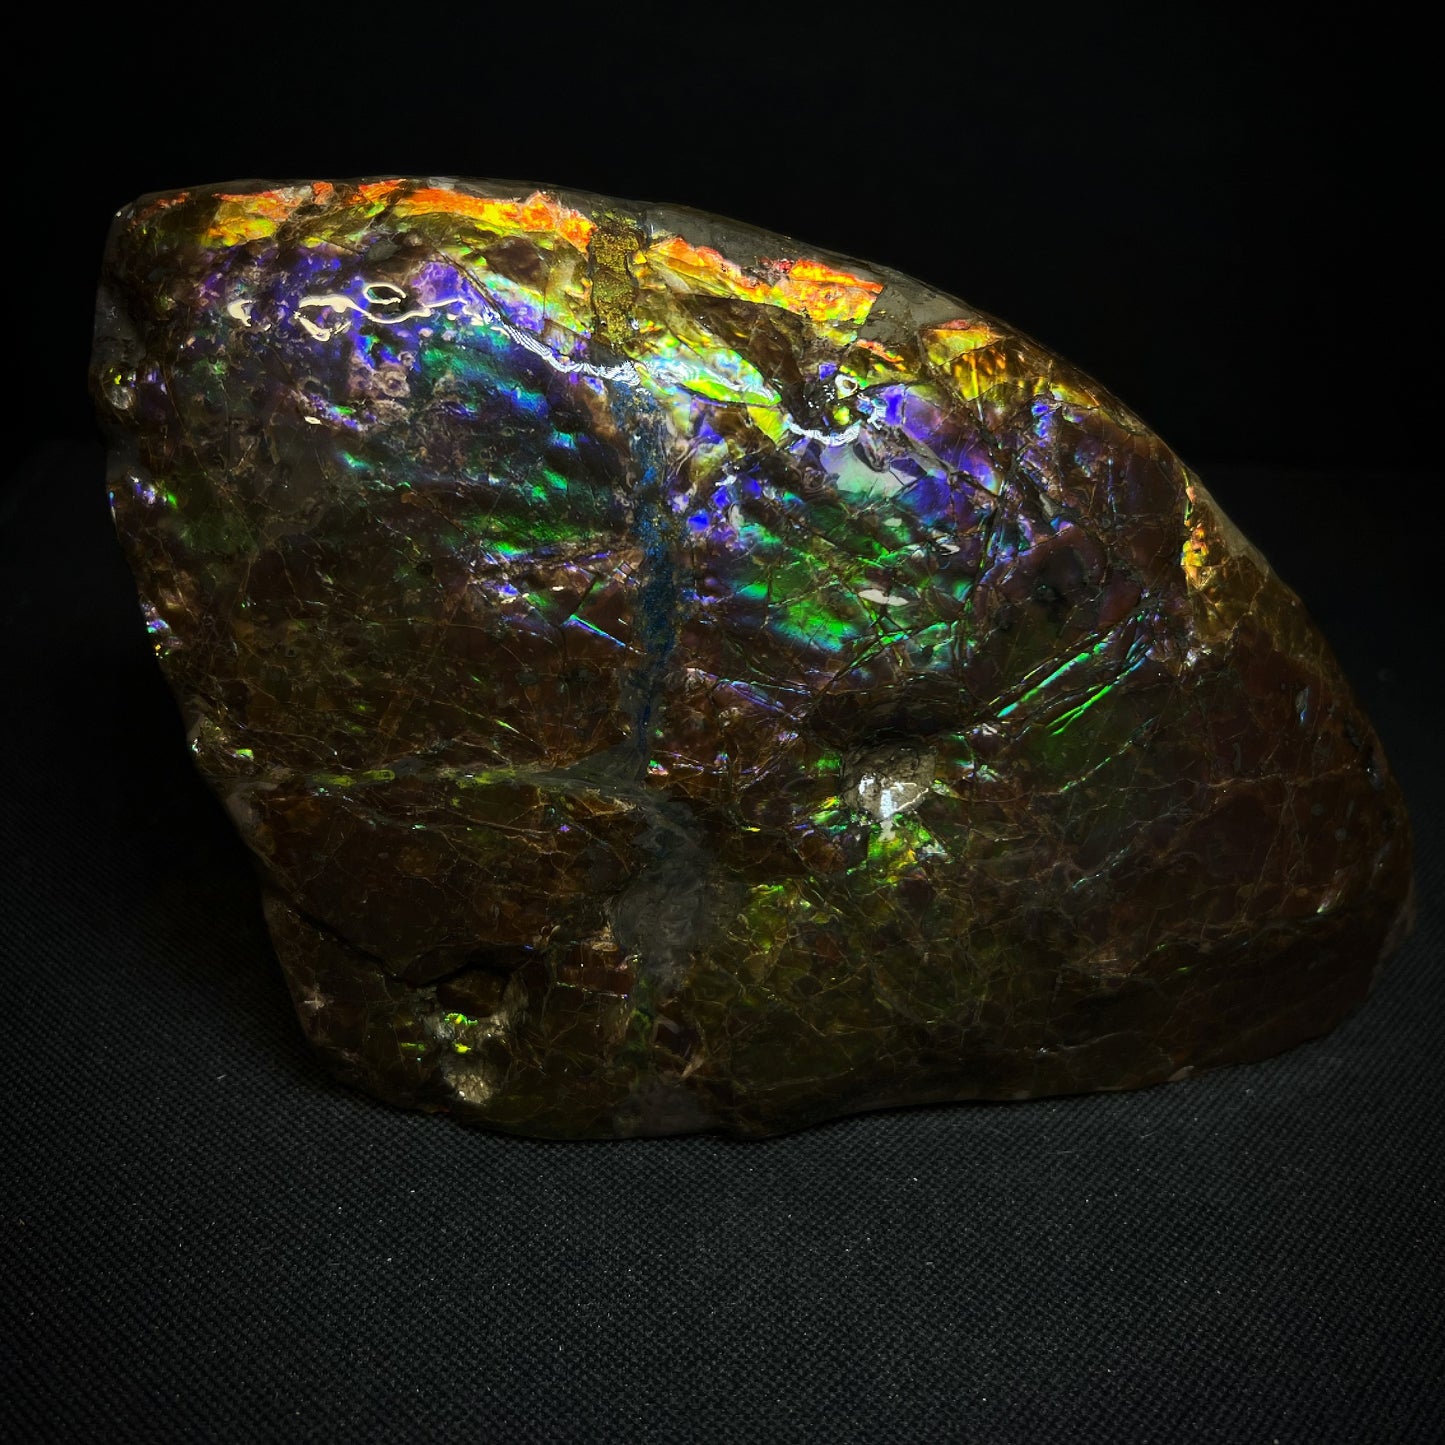 Remarkable Ammolite Gem Specimen With Teeth Impressions Of The Mosasaur From Alberta, Canada- Fossil, Gem, Collectors Piece